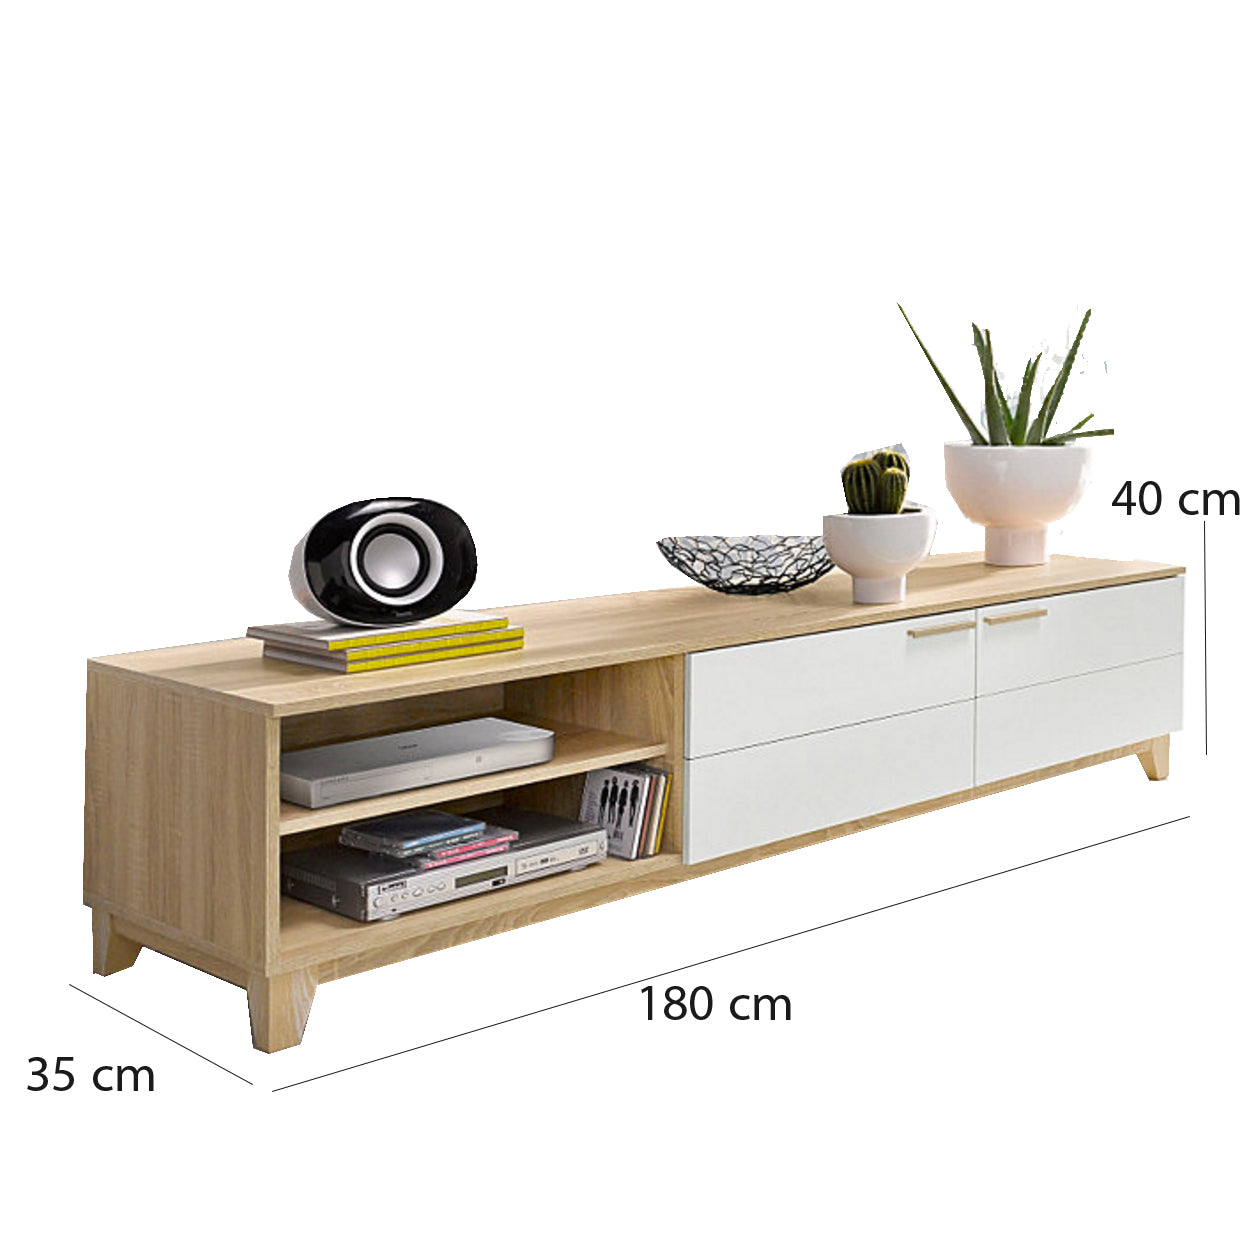 TV table 35×180 cm - FNH407